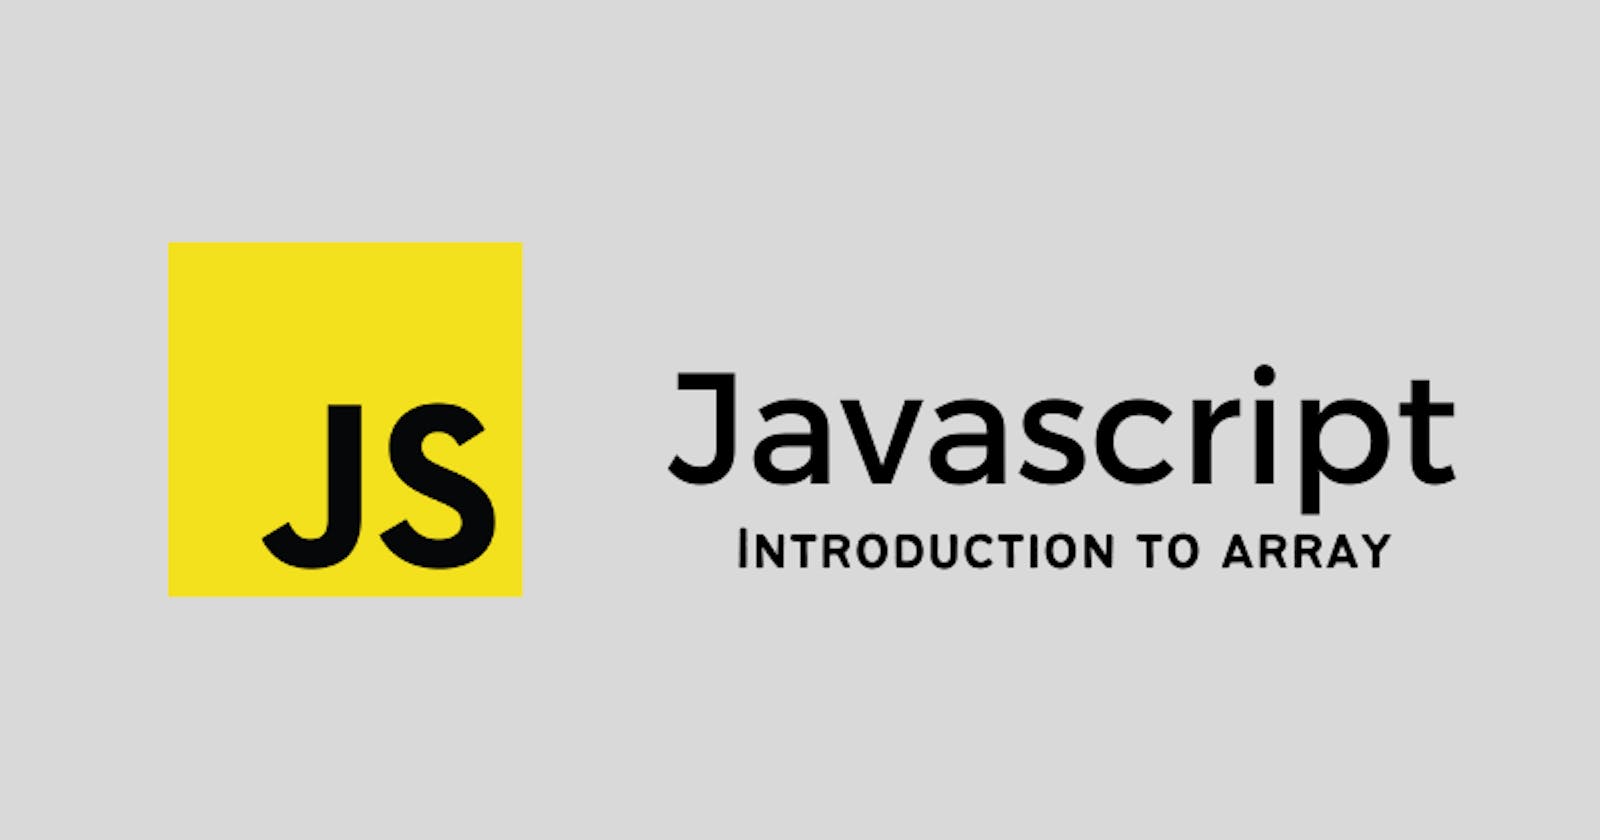 Introduction to Array in Javascript